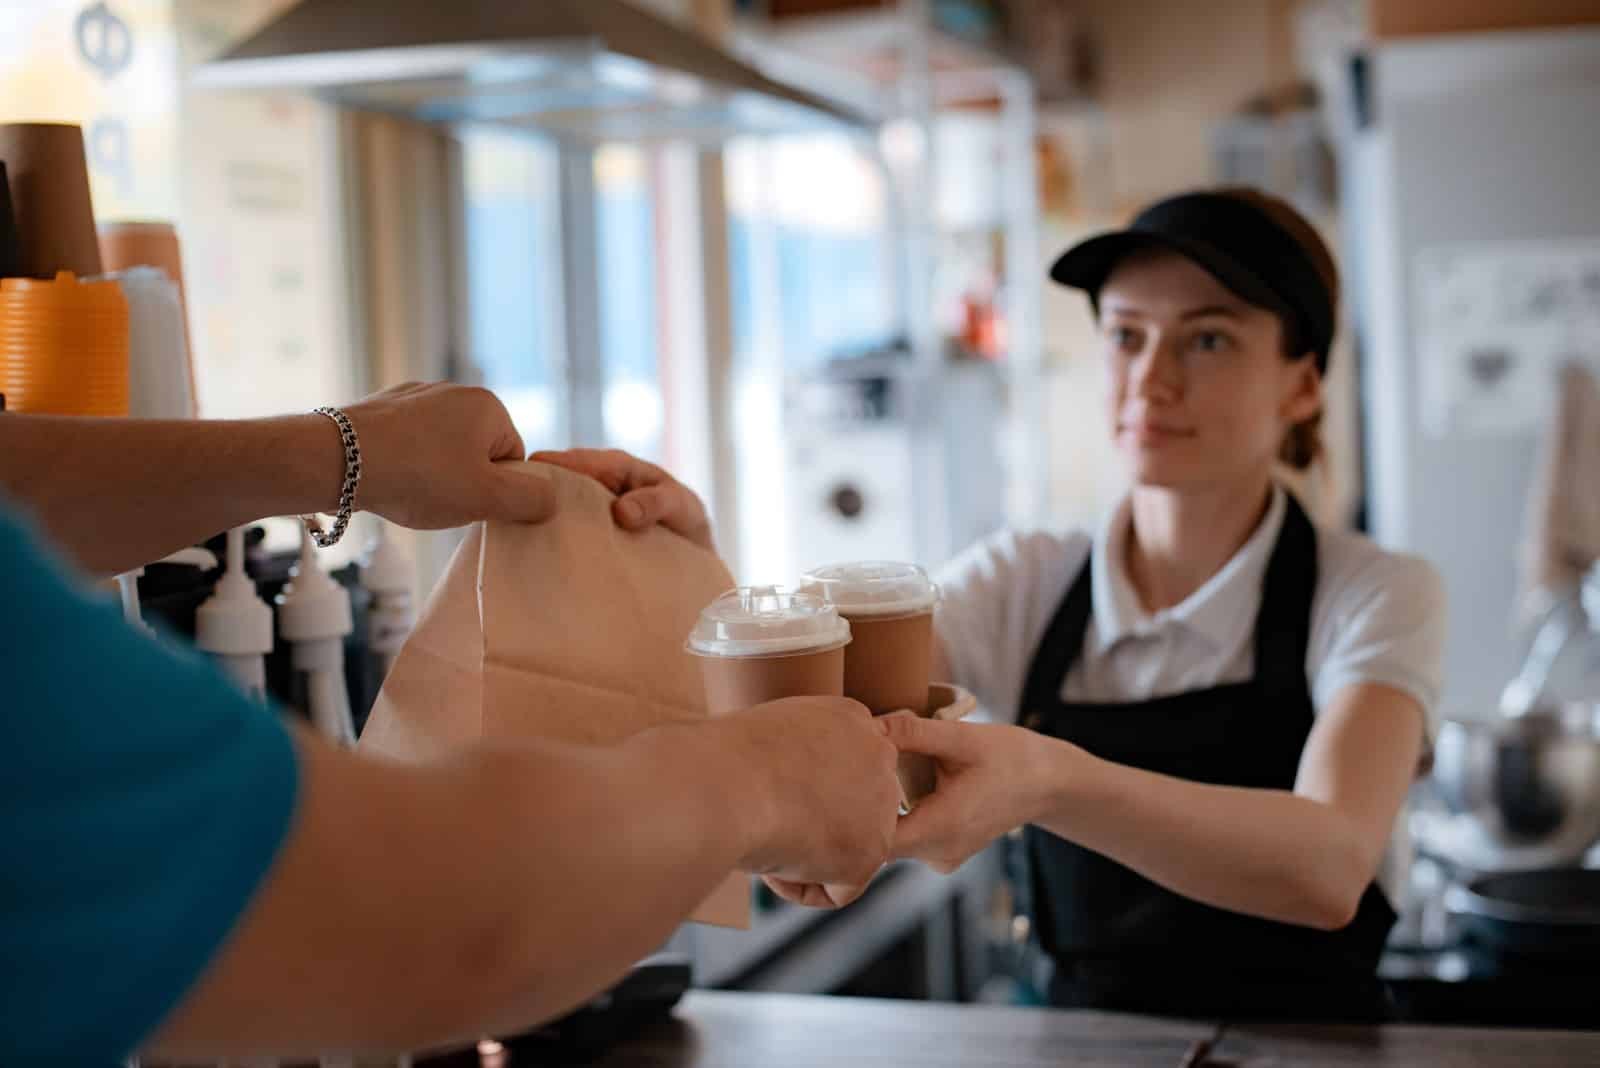 Image Credit: Shutterstock / Juliya Shangarey <p><span>Until they are officially phased out, Caffeinated Sips beverages will be sold behind the counter in all Panera cafes. Prior to this, the drinks were available at the front of the stores for customers to more easily access.</span></p>